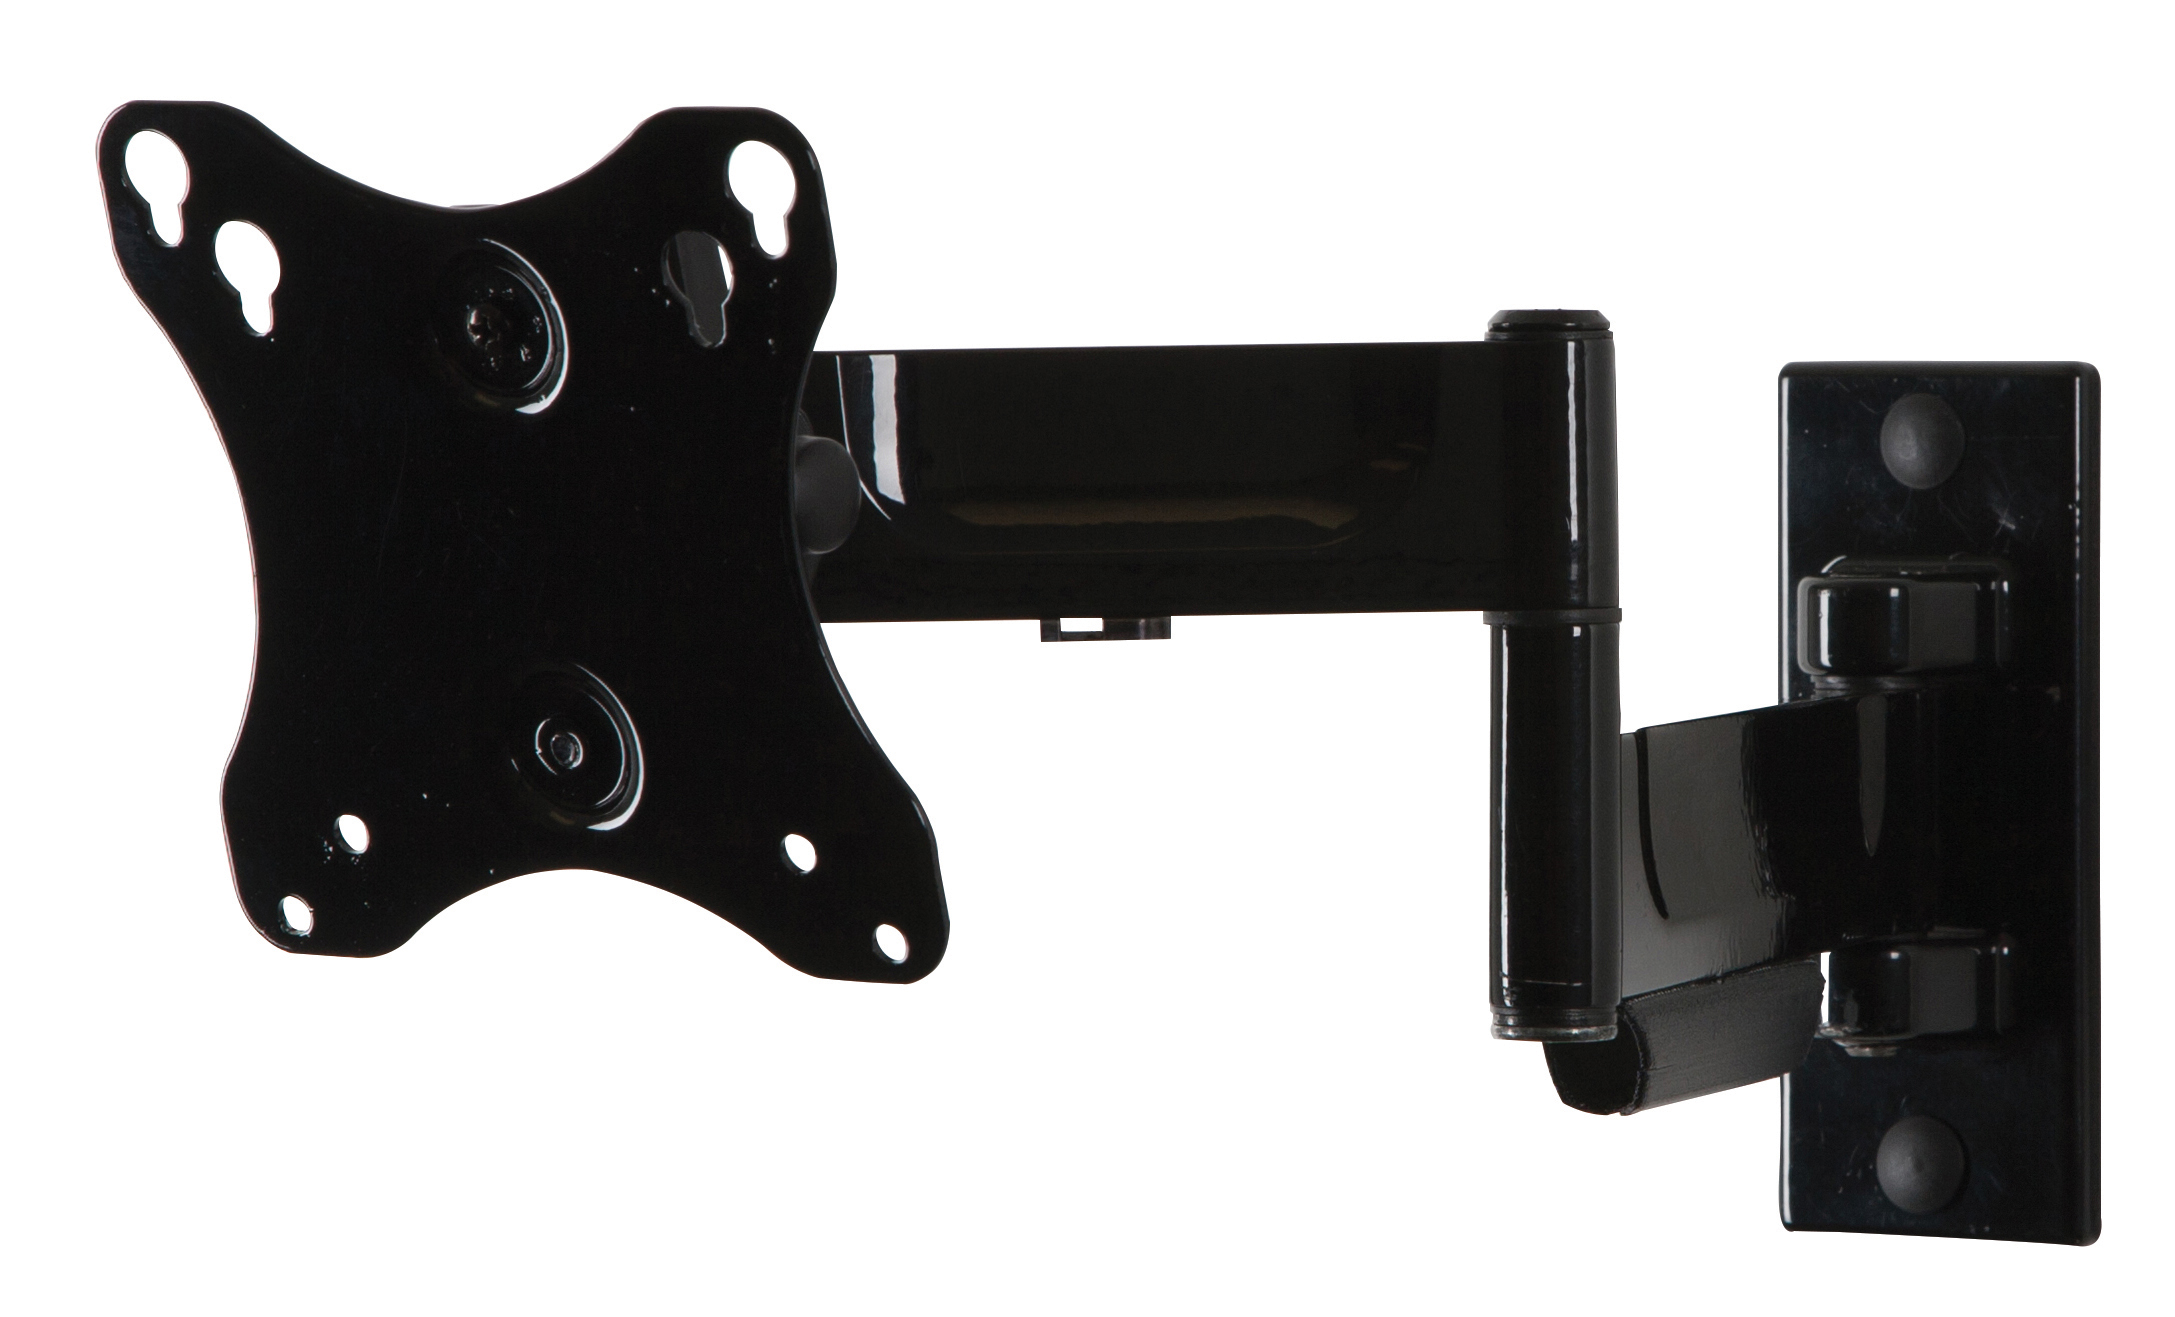 PA730 Articulating Wall Mount